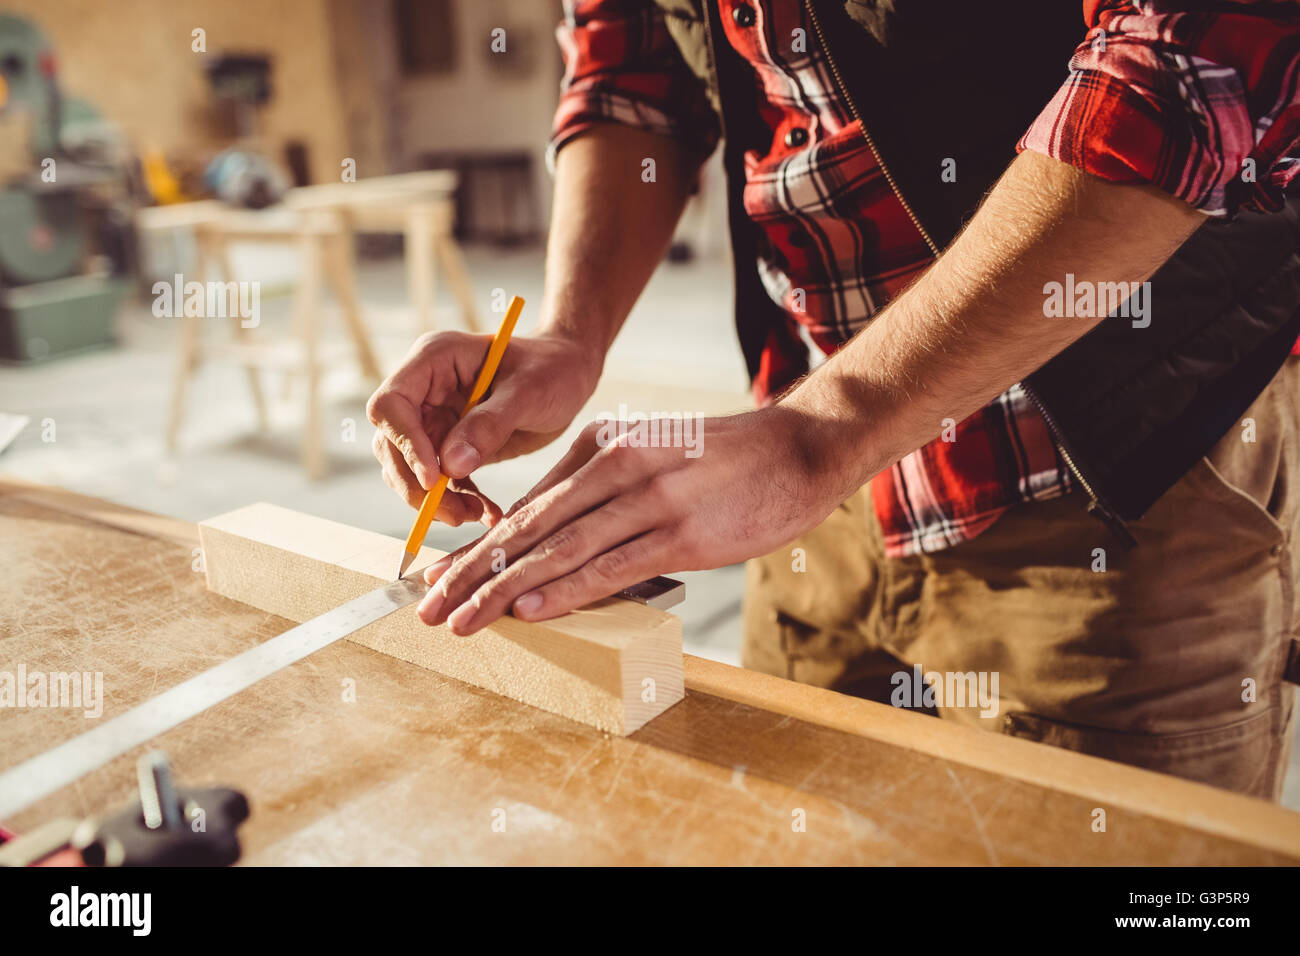 Carpenter writing a mark on a wood piece Stock Photo